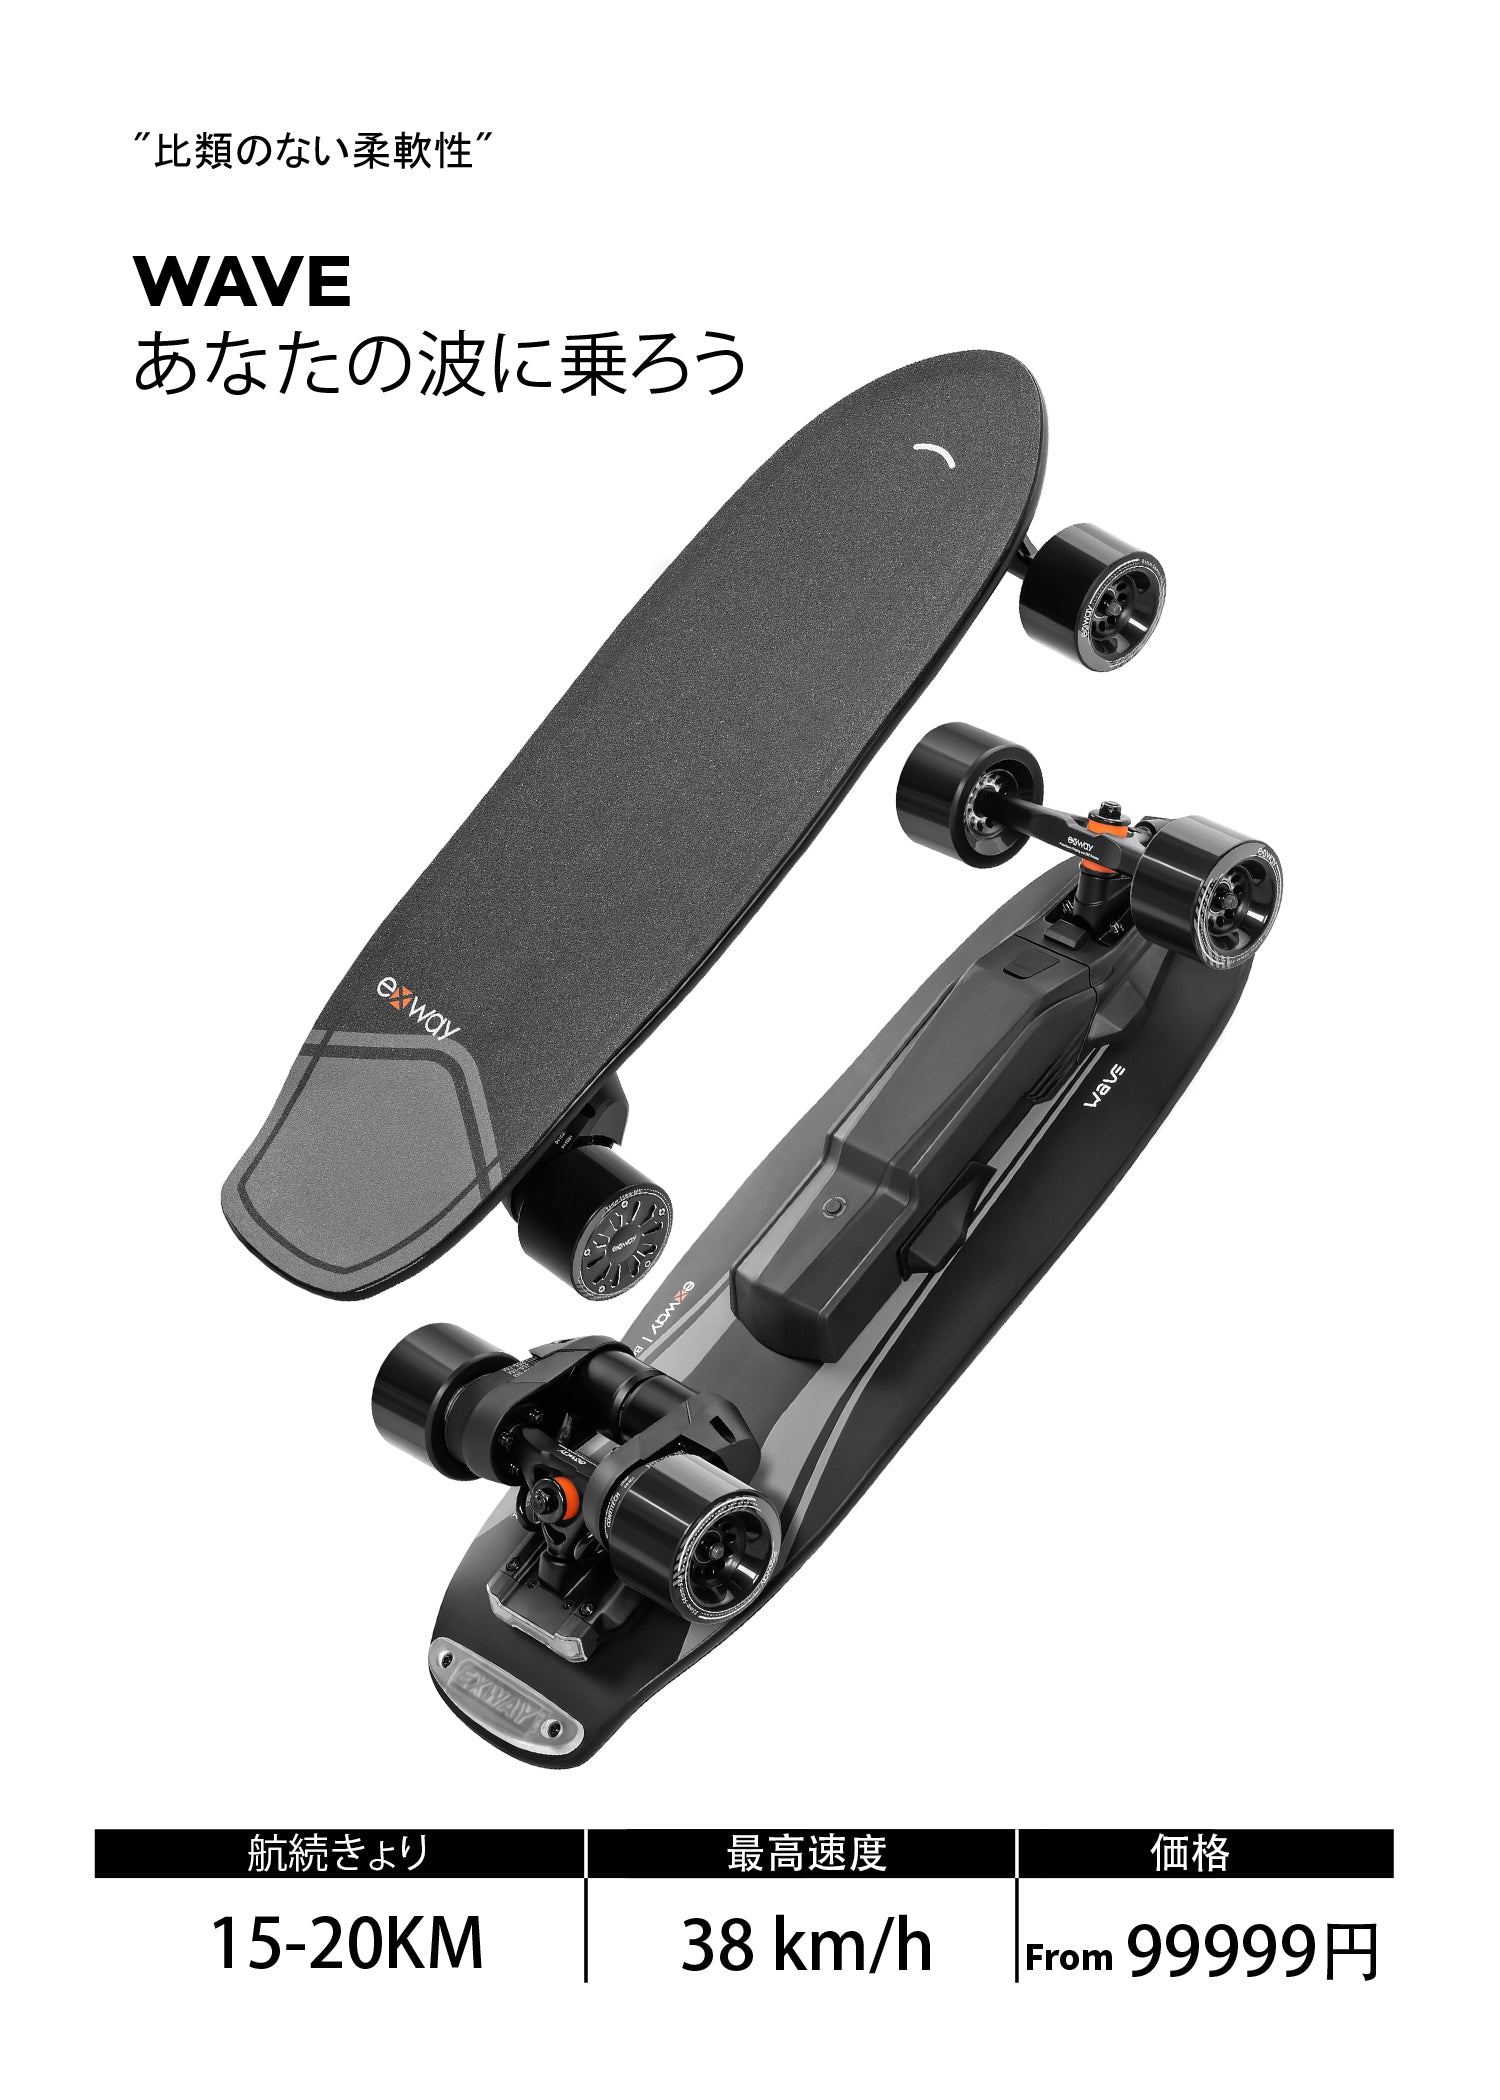 ExwayBoards｜で最も優れた電動スケートボードロングボード